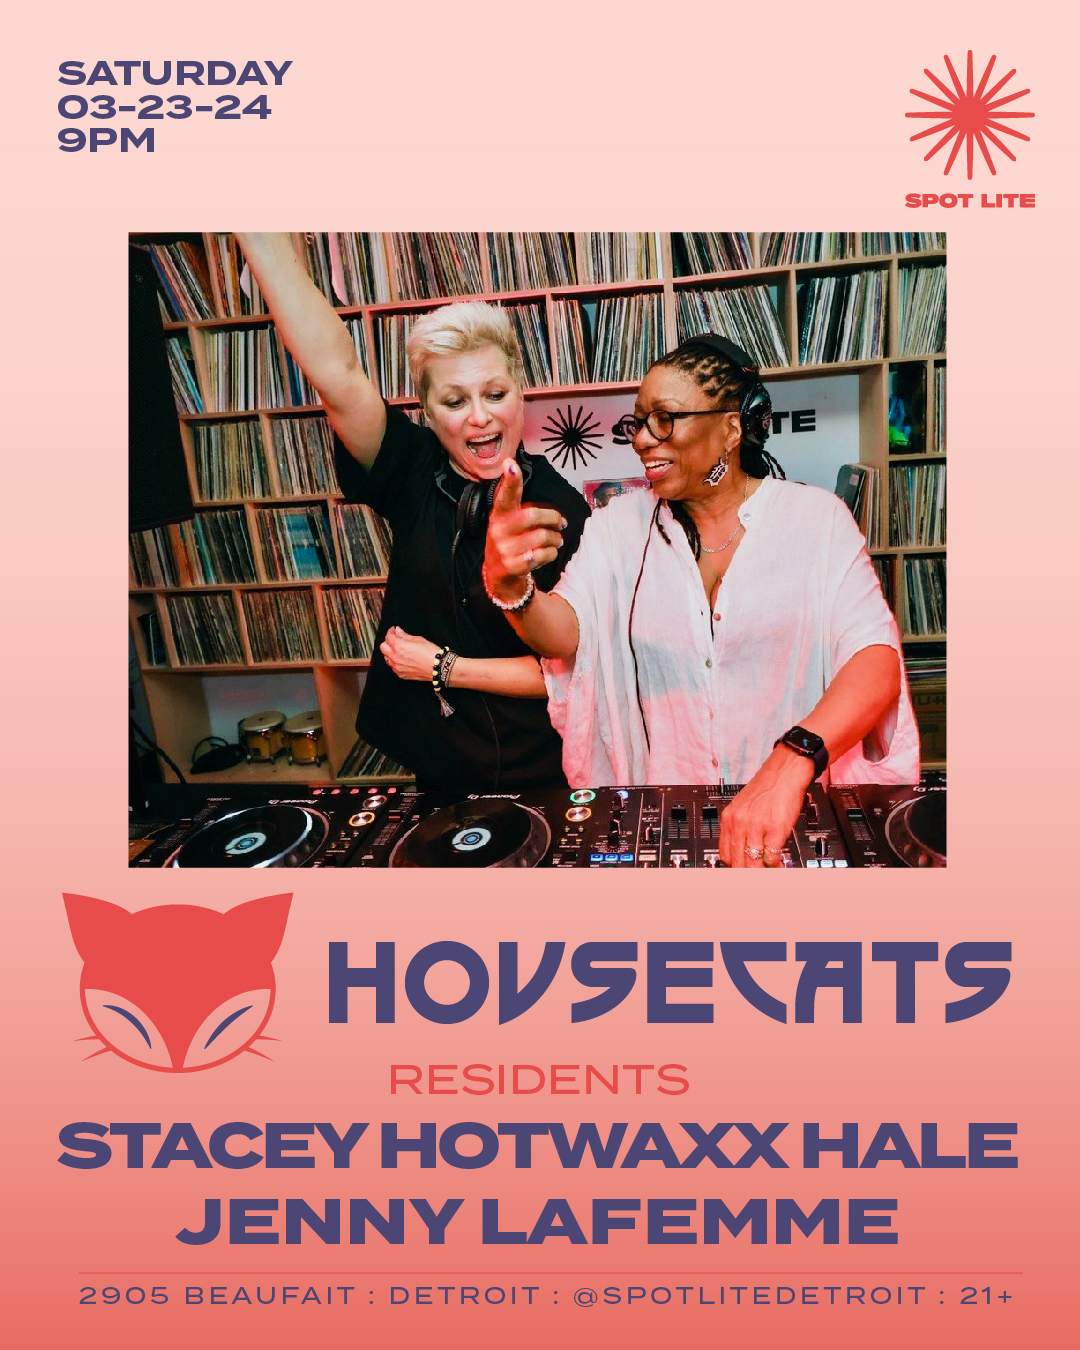 Housecats featuring Stacey Hotwaxx Hale & Jenny Lafemme - フライヤー表